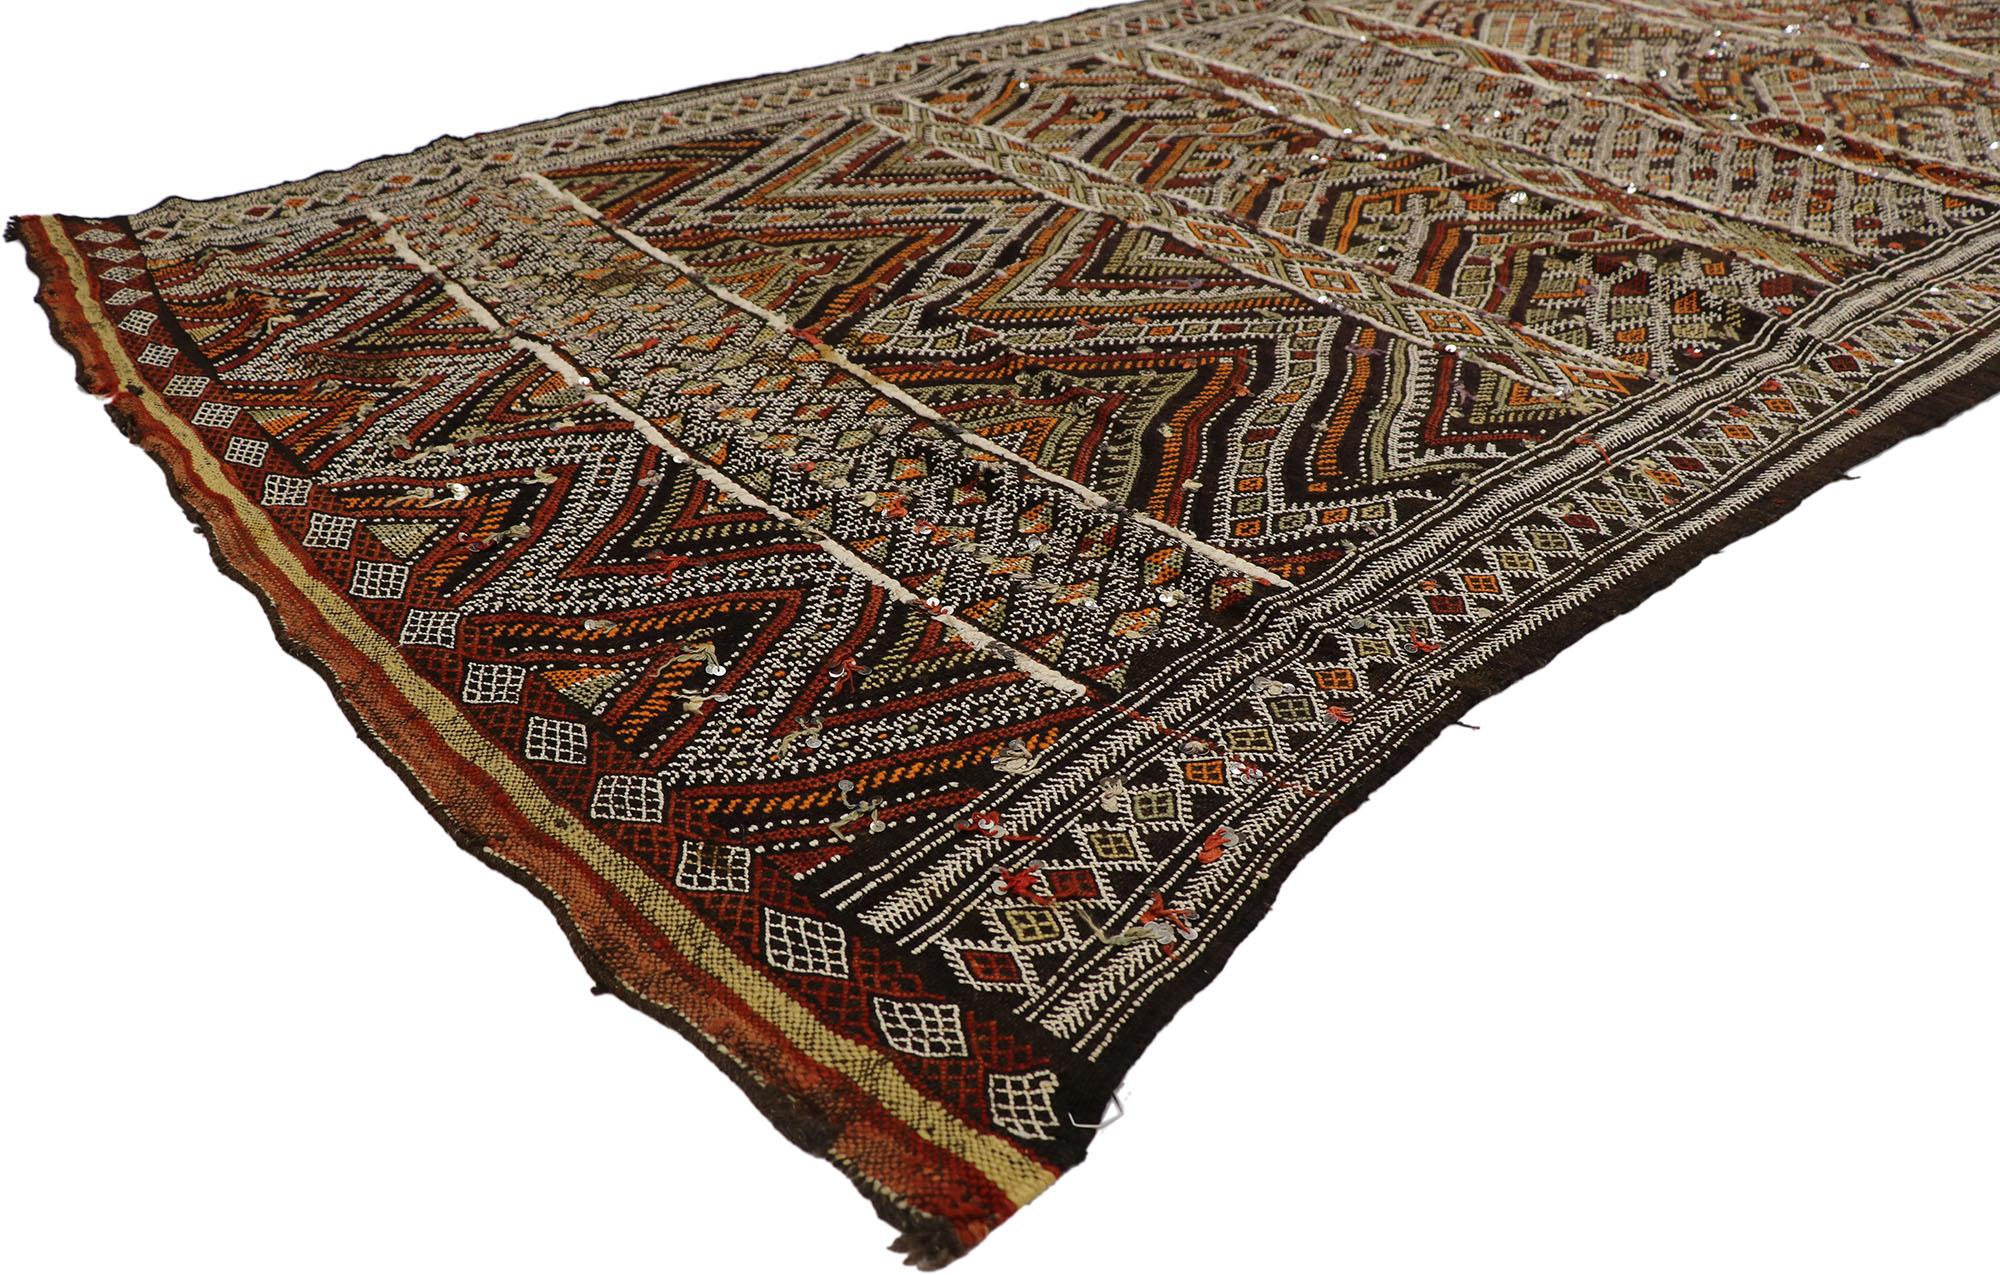 21470 Vintage Zemmour Moroccan Kilim runner with Sequins and Tribal Boho Chic style. Measures: 04'09 x 11'01. Full of tiny details and embellished with sequins combined with earth-tone colors and tribal style, this hand-woven wool vintage Zemmour